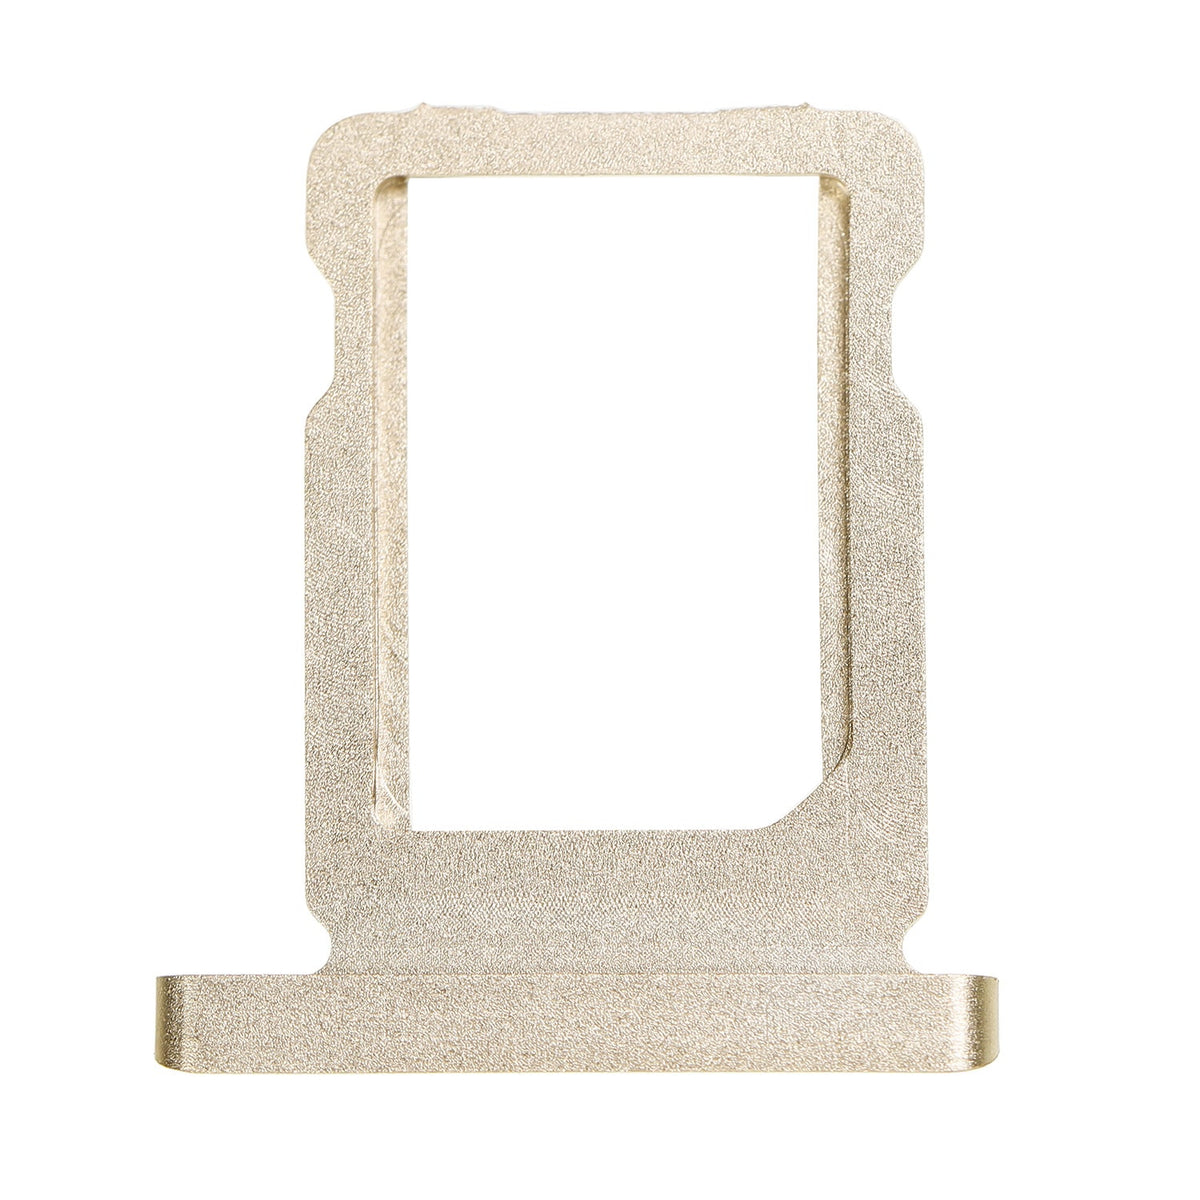 SIM CARD TRAY FOR IPAD 12.9 2ND GEN- GOLD